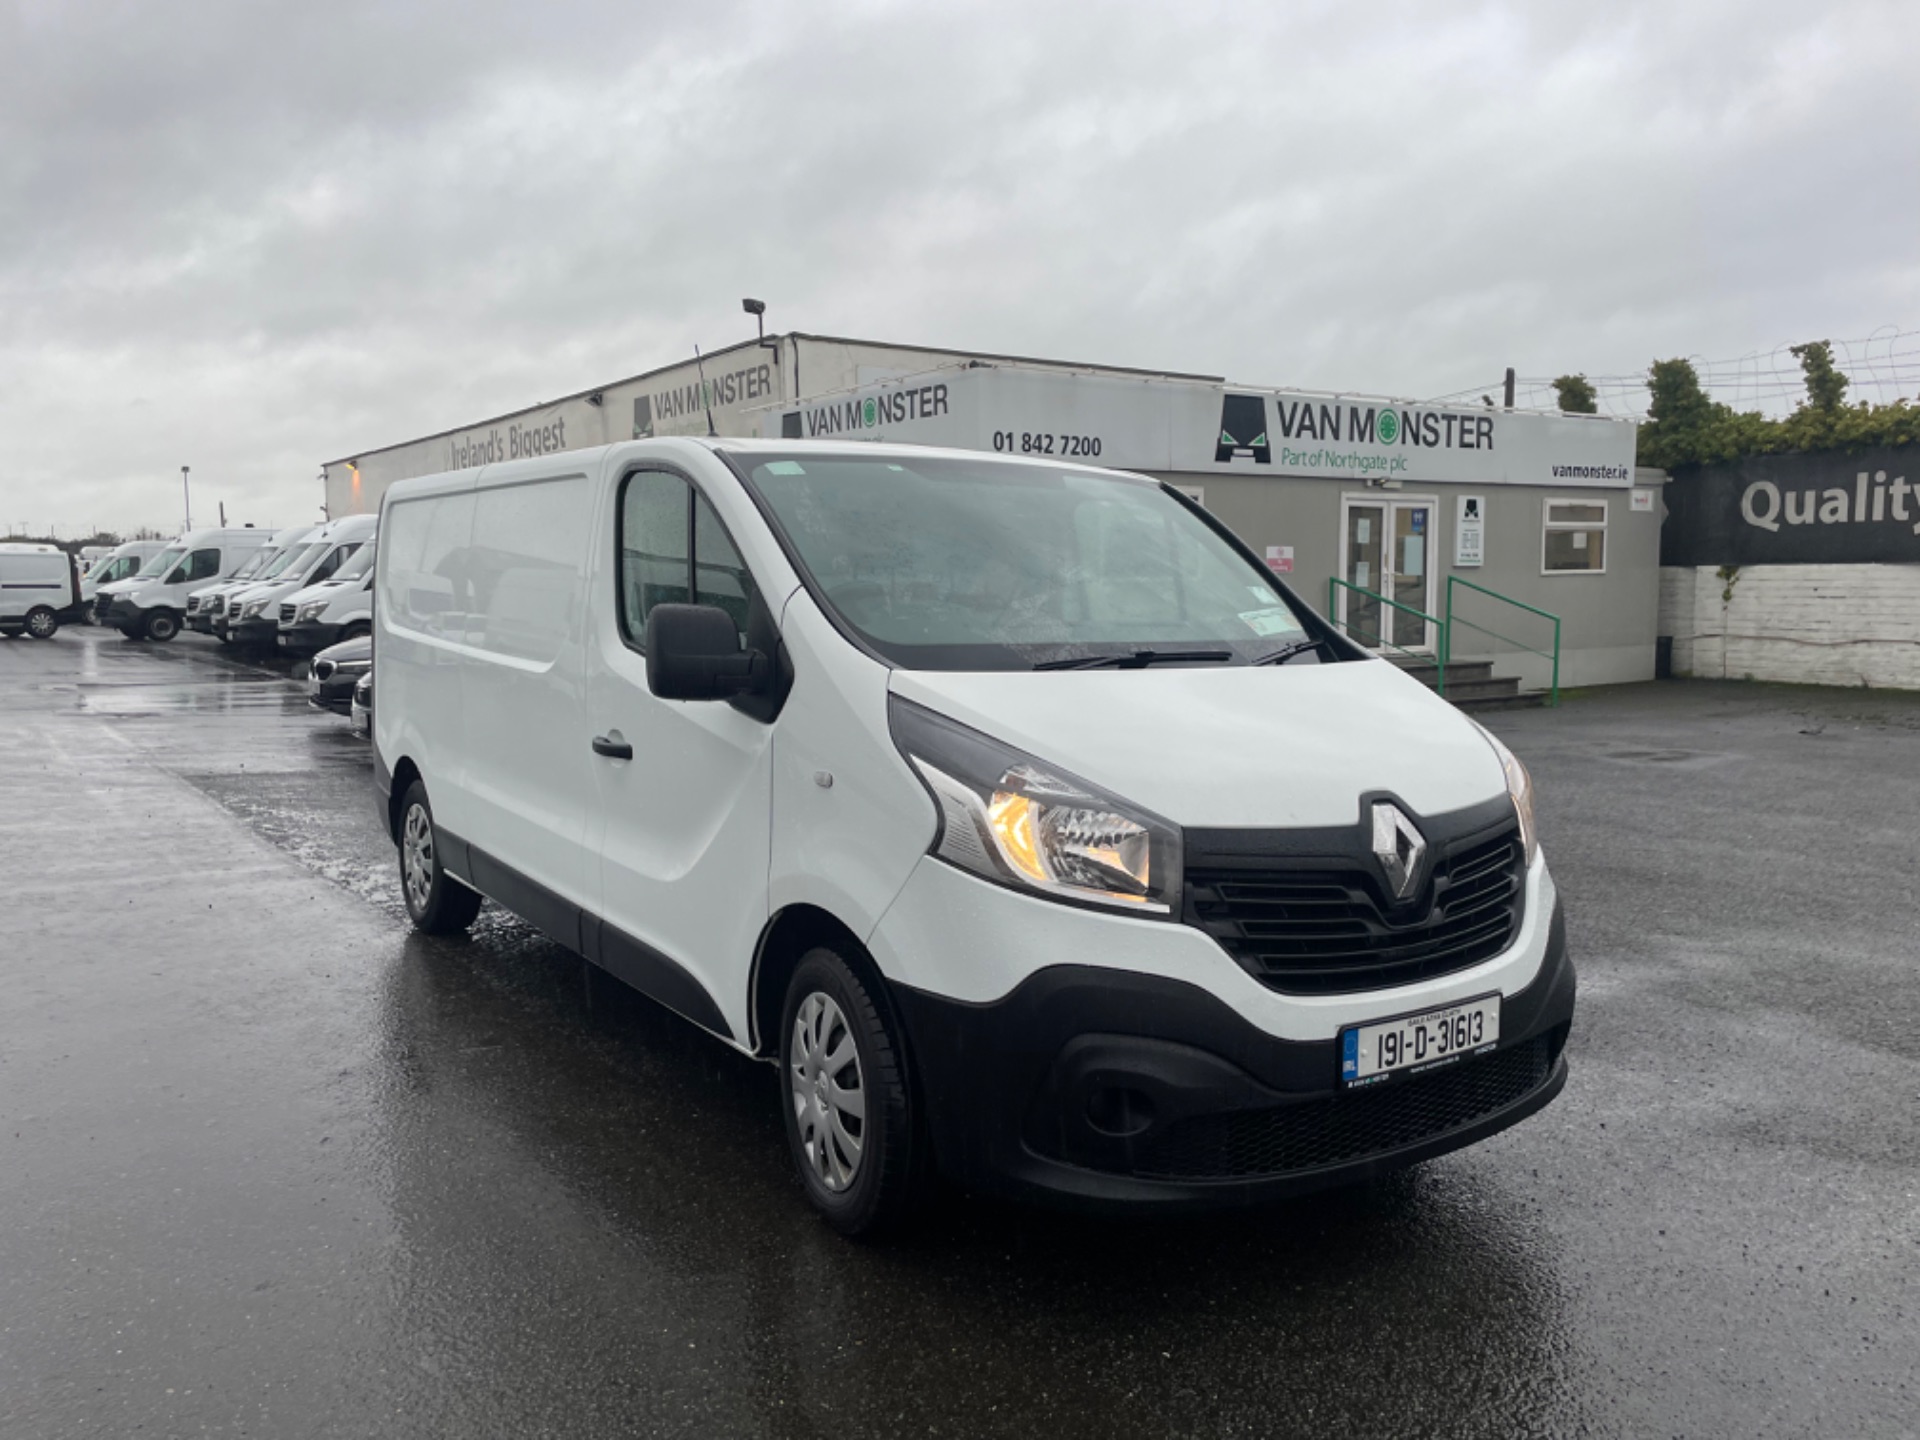 2019 Renault Trafic LL29 DCI 120 Business (191D31613) Image 1